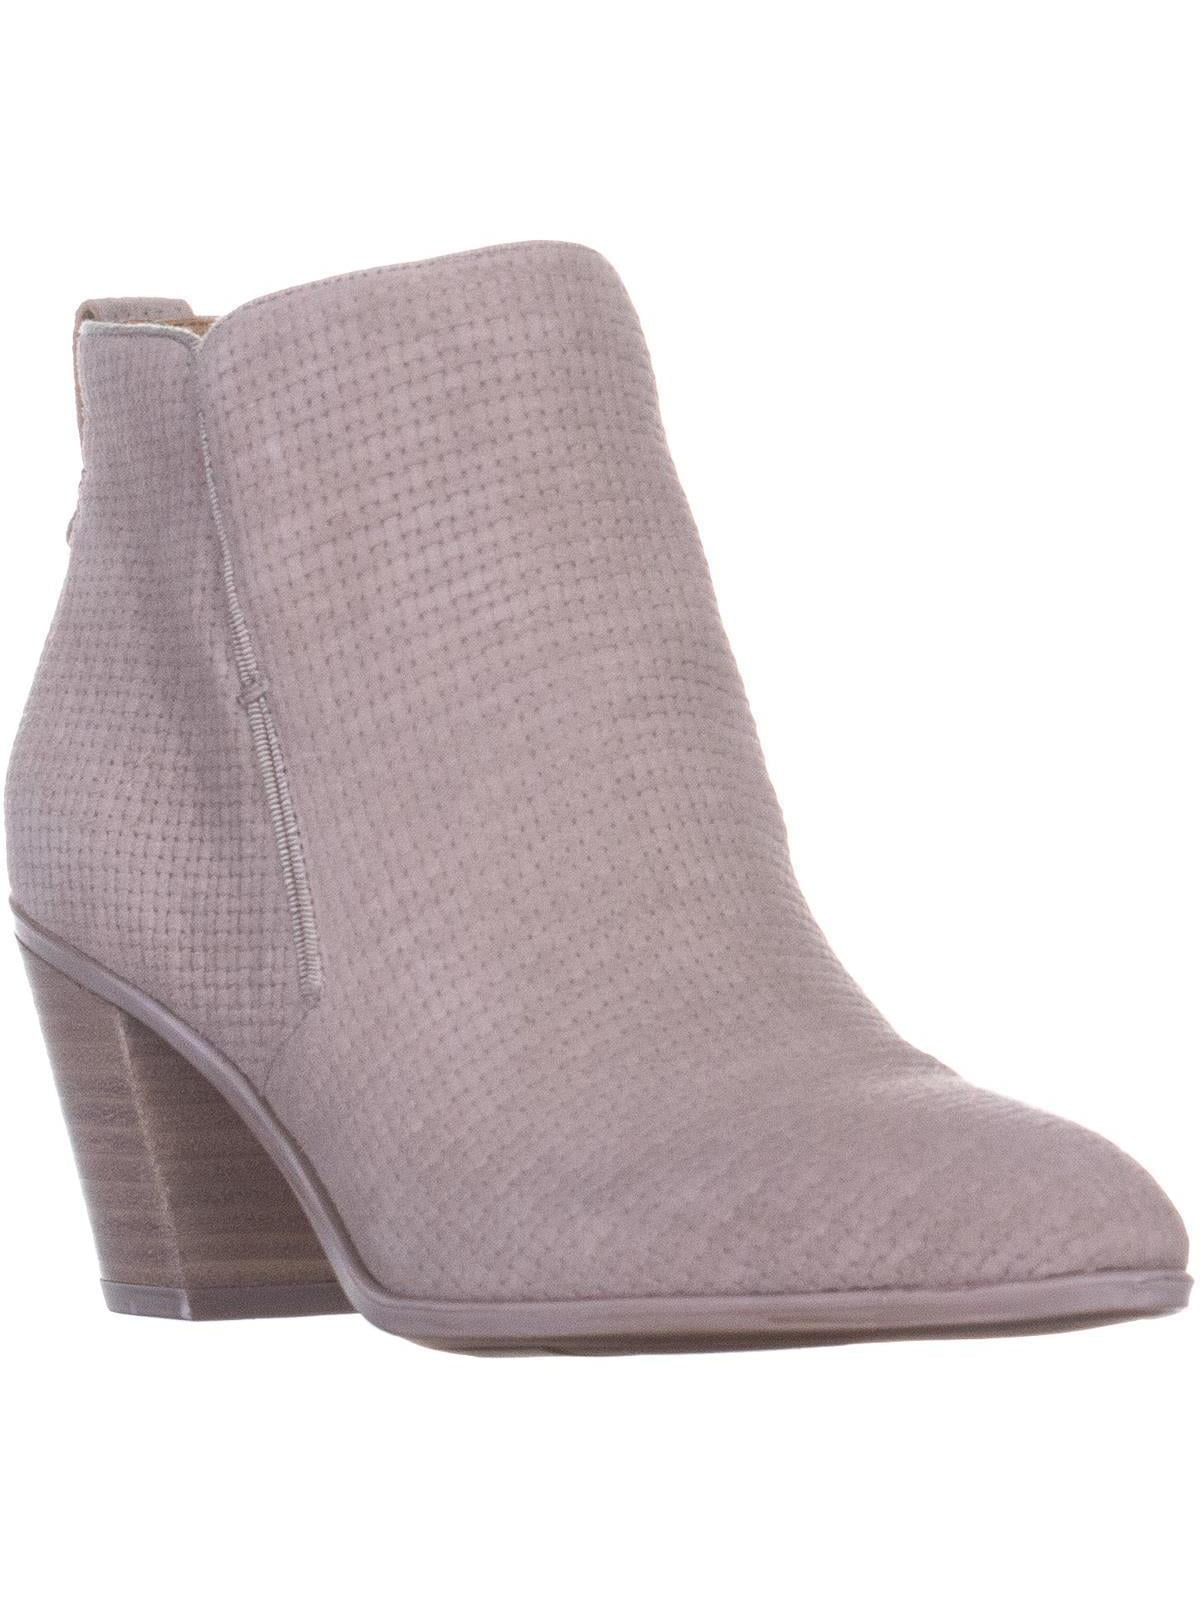 franco sarto suede ankle boots